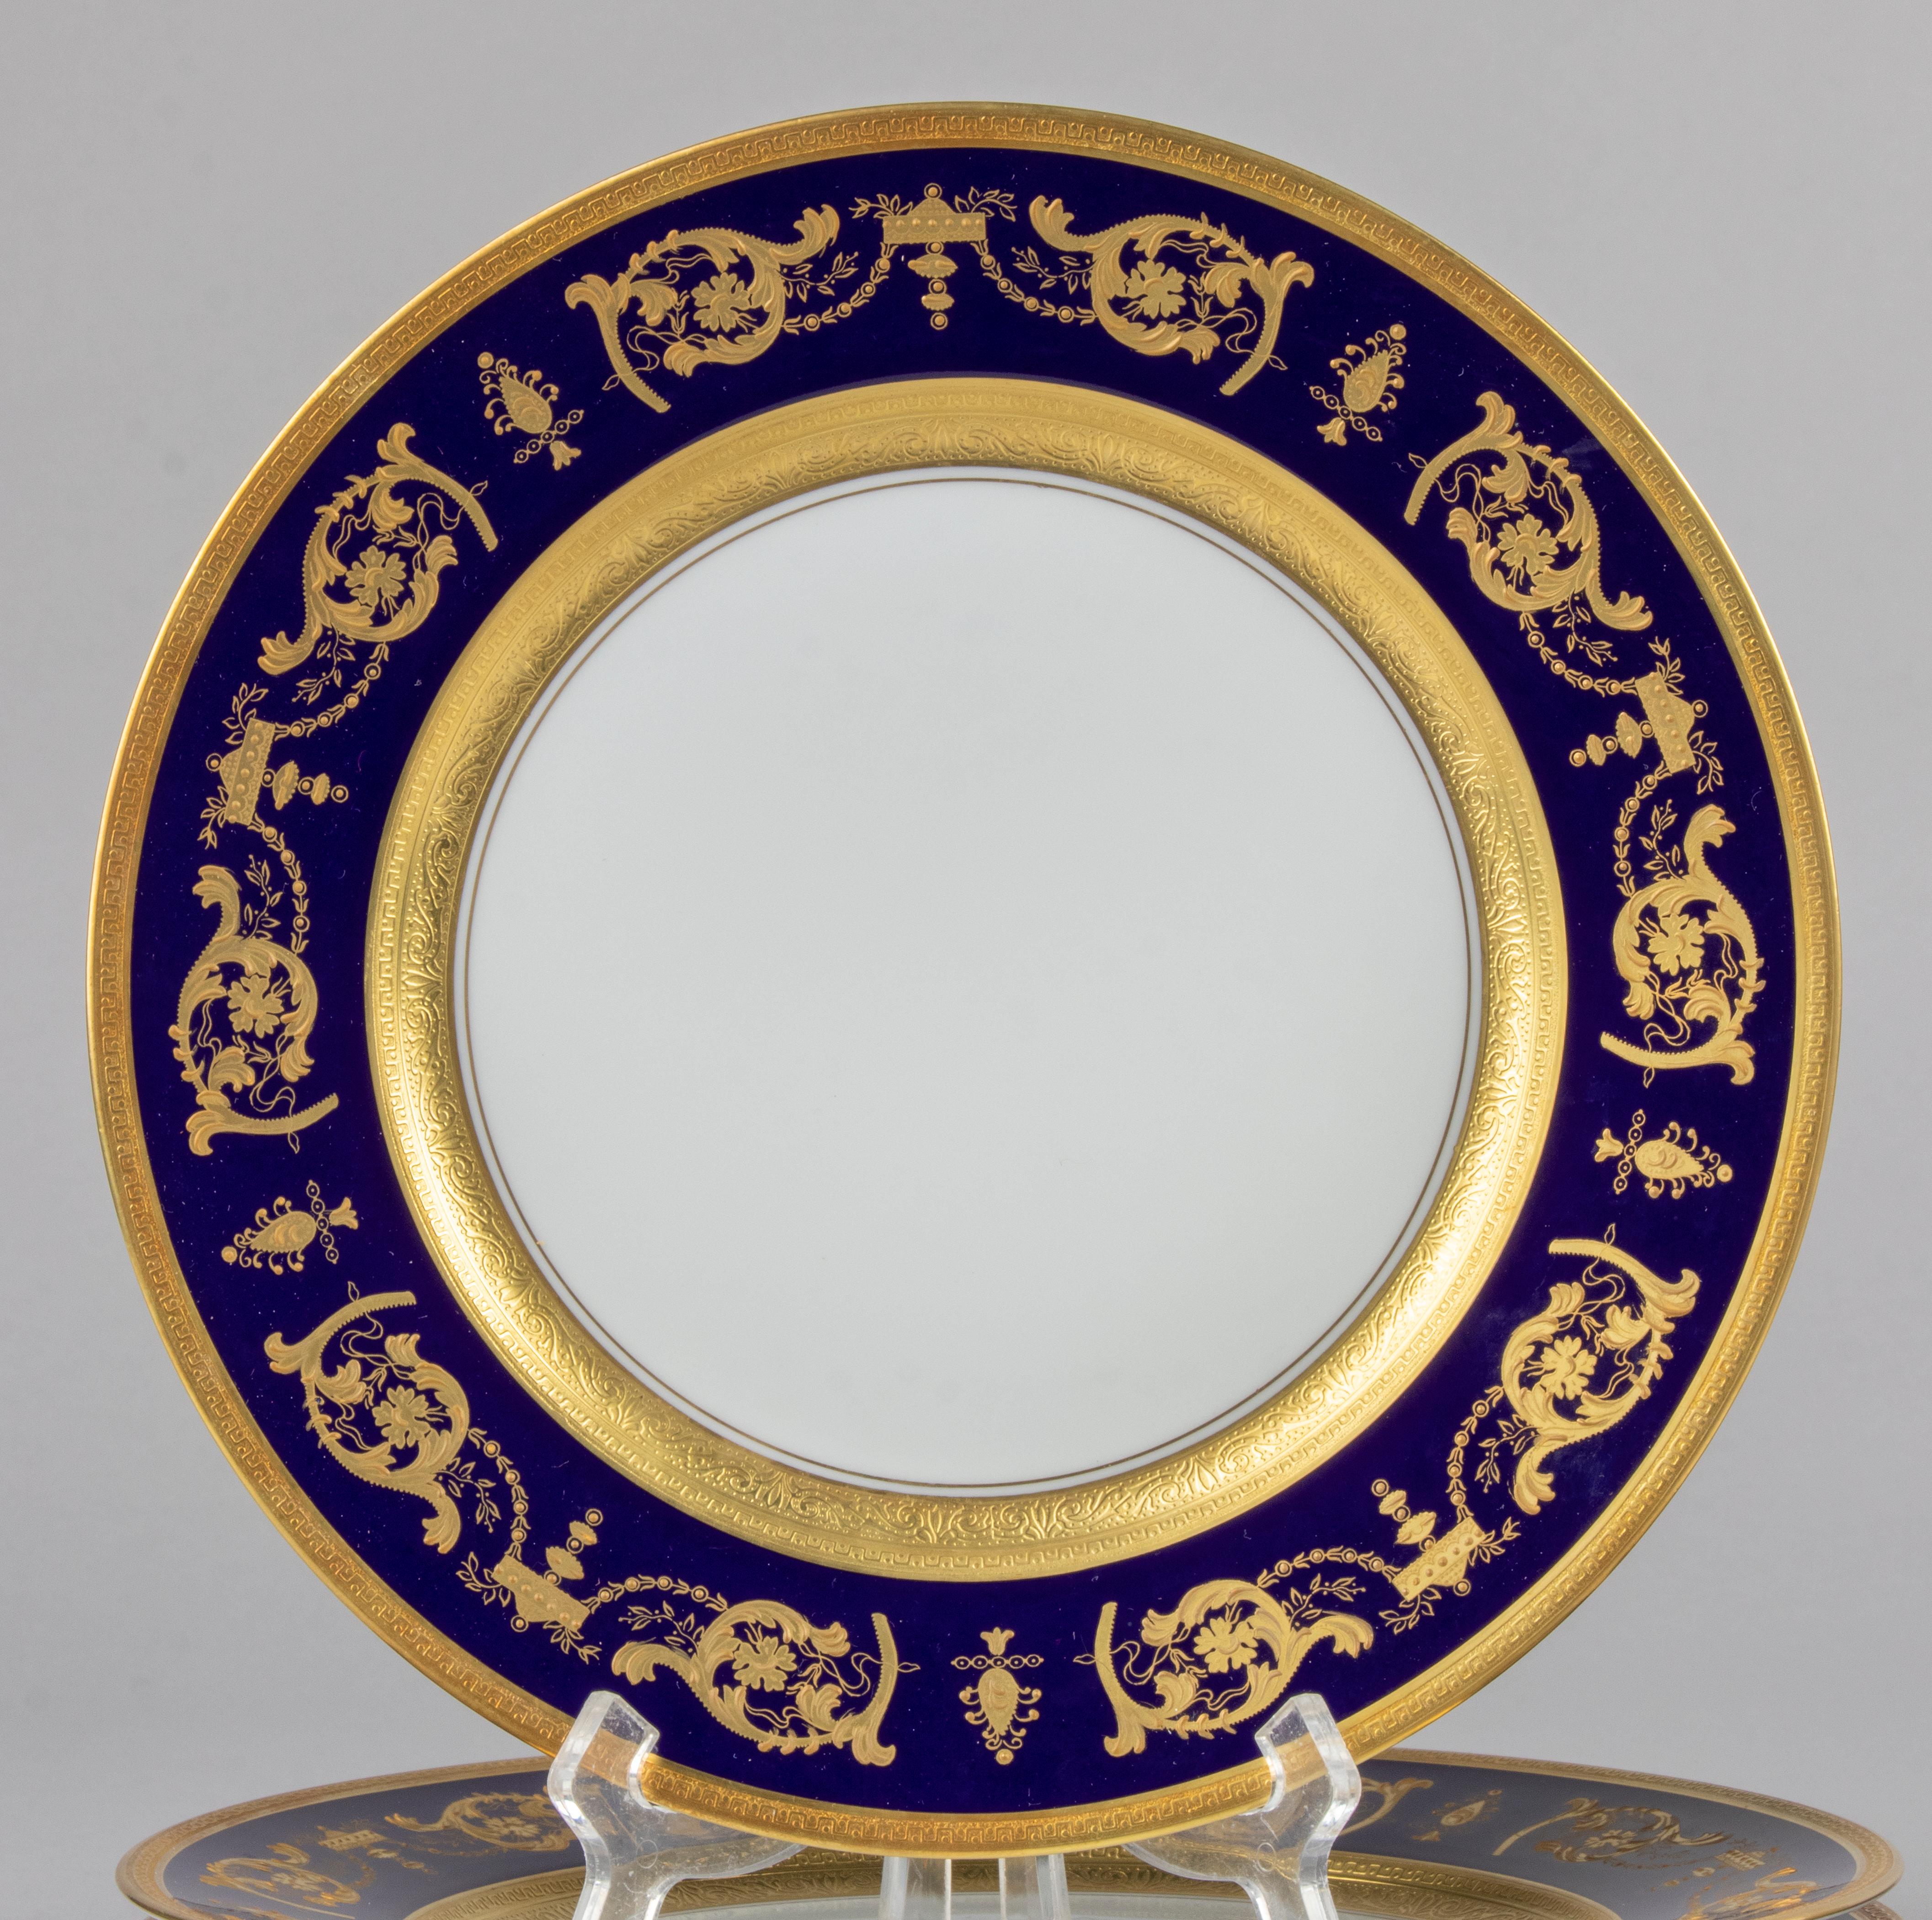 Superb set of 6 porcelain dinner plates, made by the French brand Haviland Limoges. The plates are of exceptionally high quality, with beautiful gold decorations. The name of the pattern is Impérator Blue de Four. These plates can still be ordered